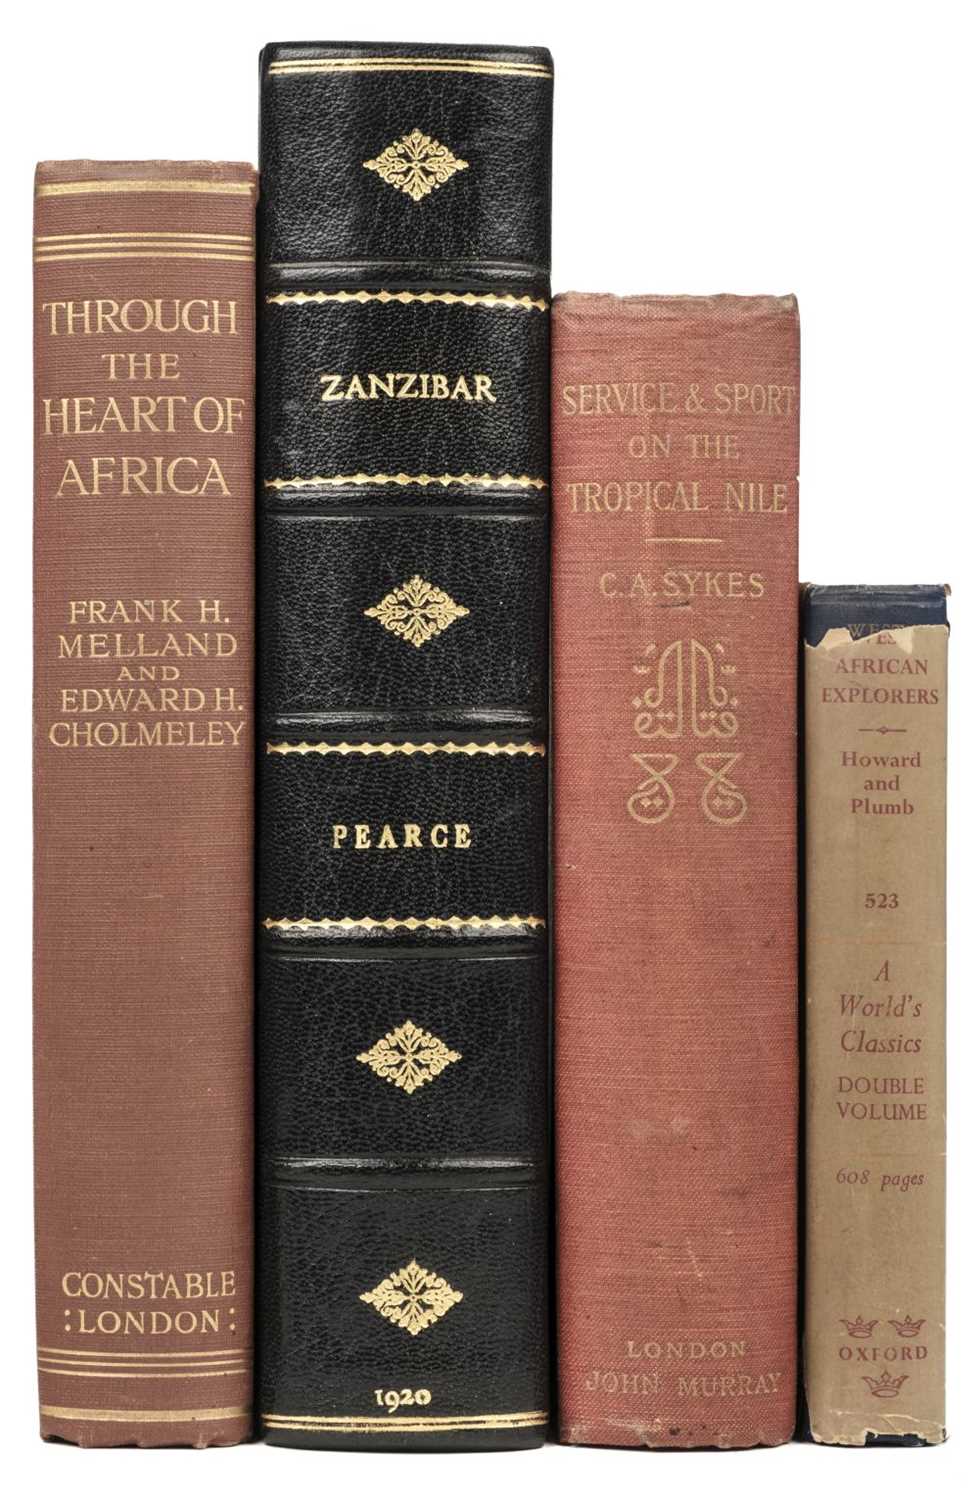 Lot 16 - Melland (Frank H.). Through the Heart of Africa, 1st edition, London: Constable, 1912